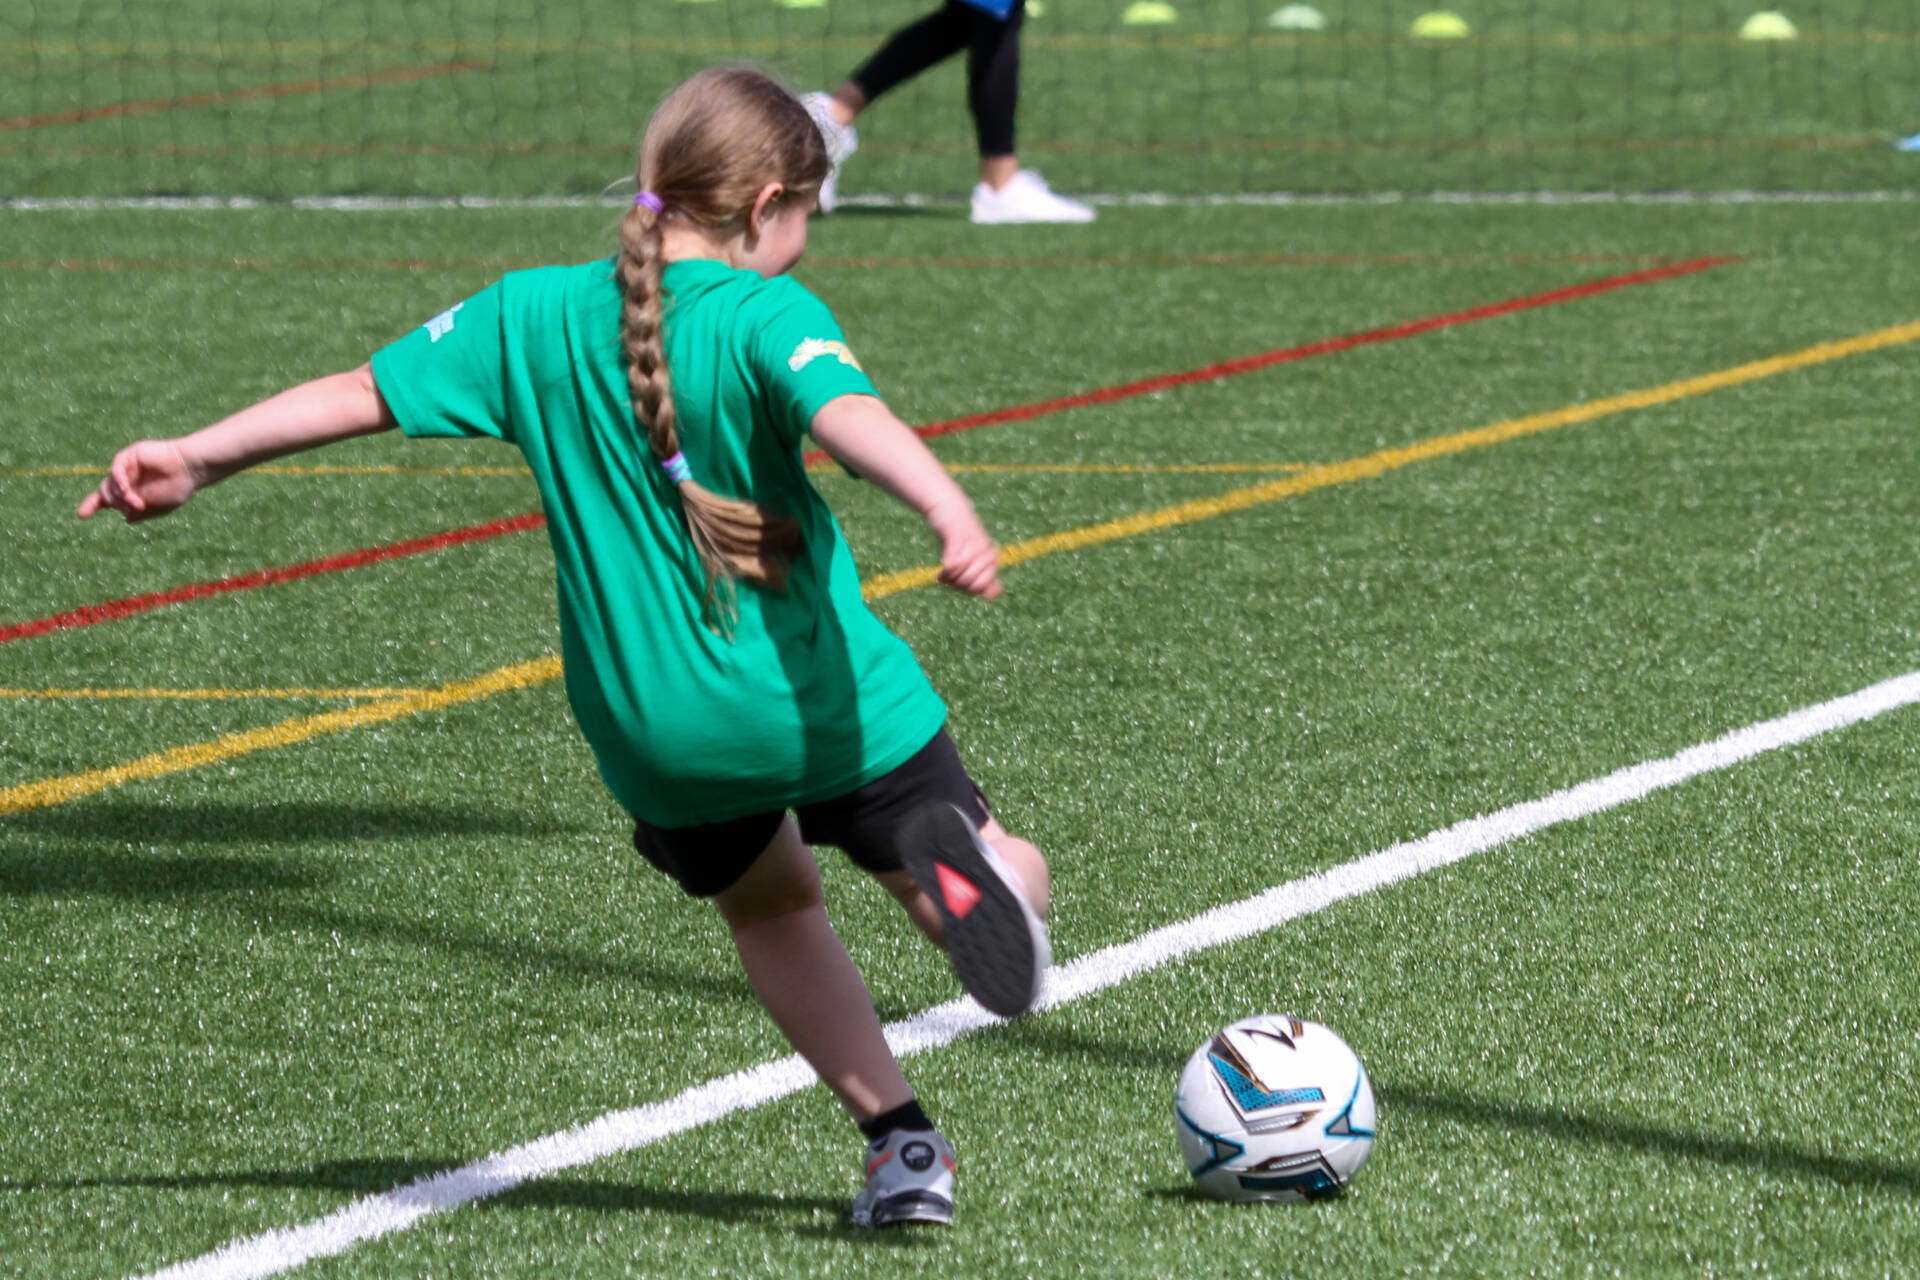 Child in a green t-shirt about to kick a football